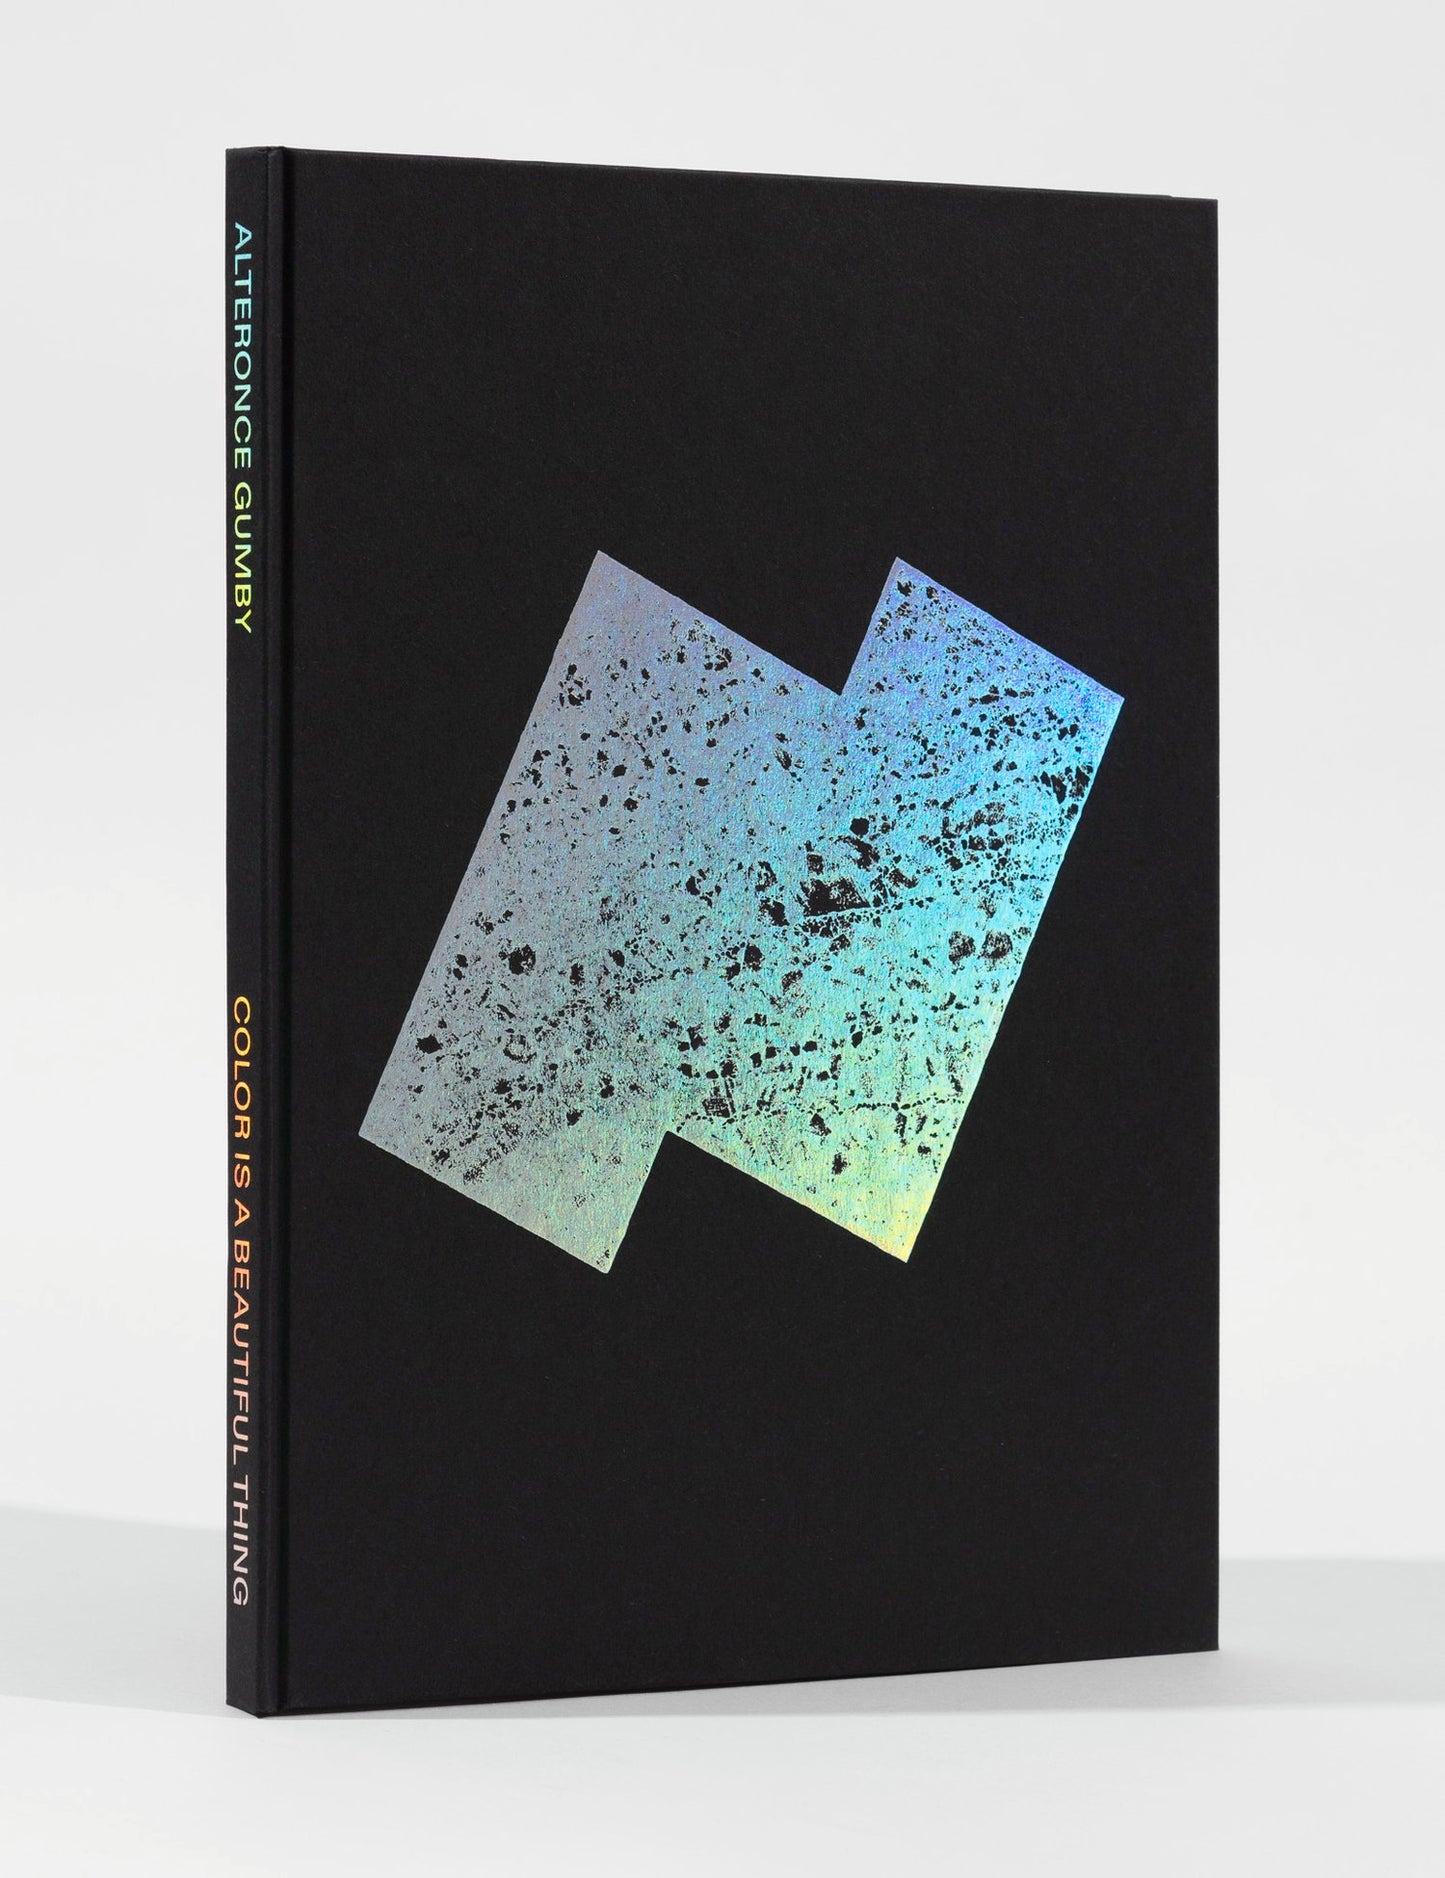 Front Cover, Monochromatic and horizontal shape with text on binding that reads,"Alteronce Gumby, space. Color is a beautiful thing"